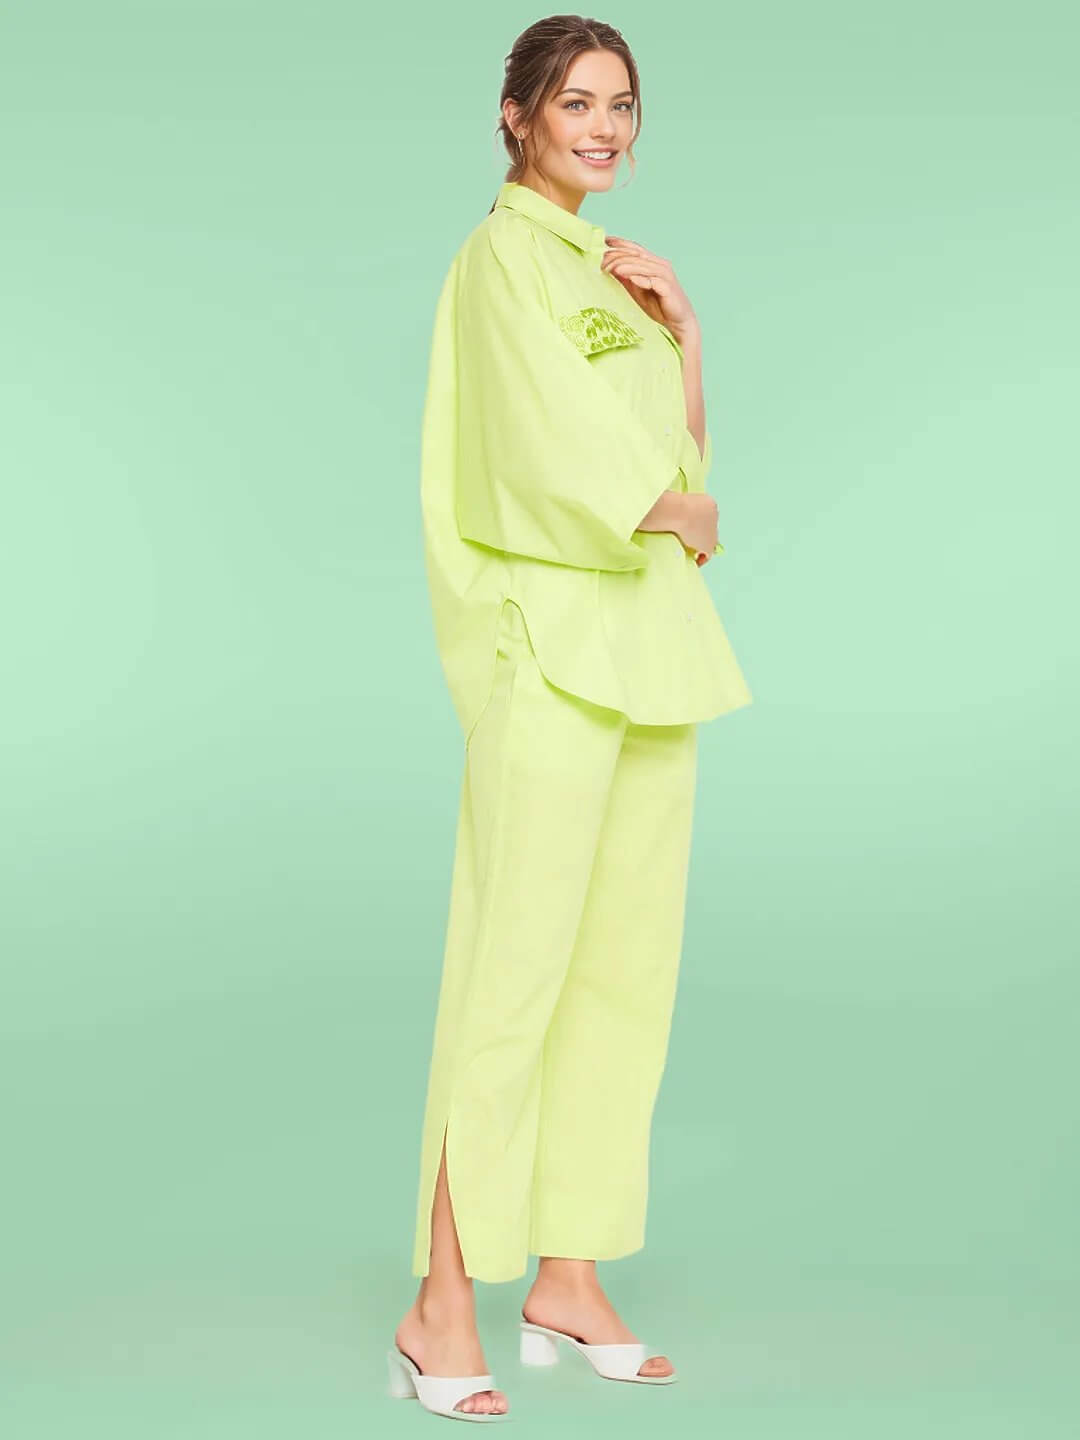 NEON GREEN CO-ORD SETS - Antimony